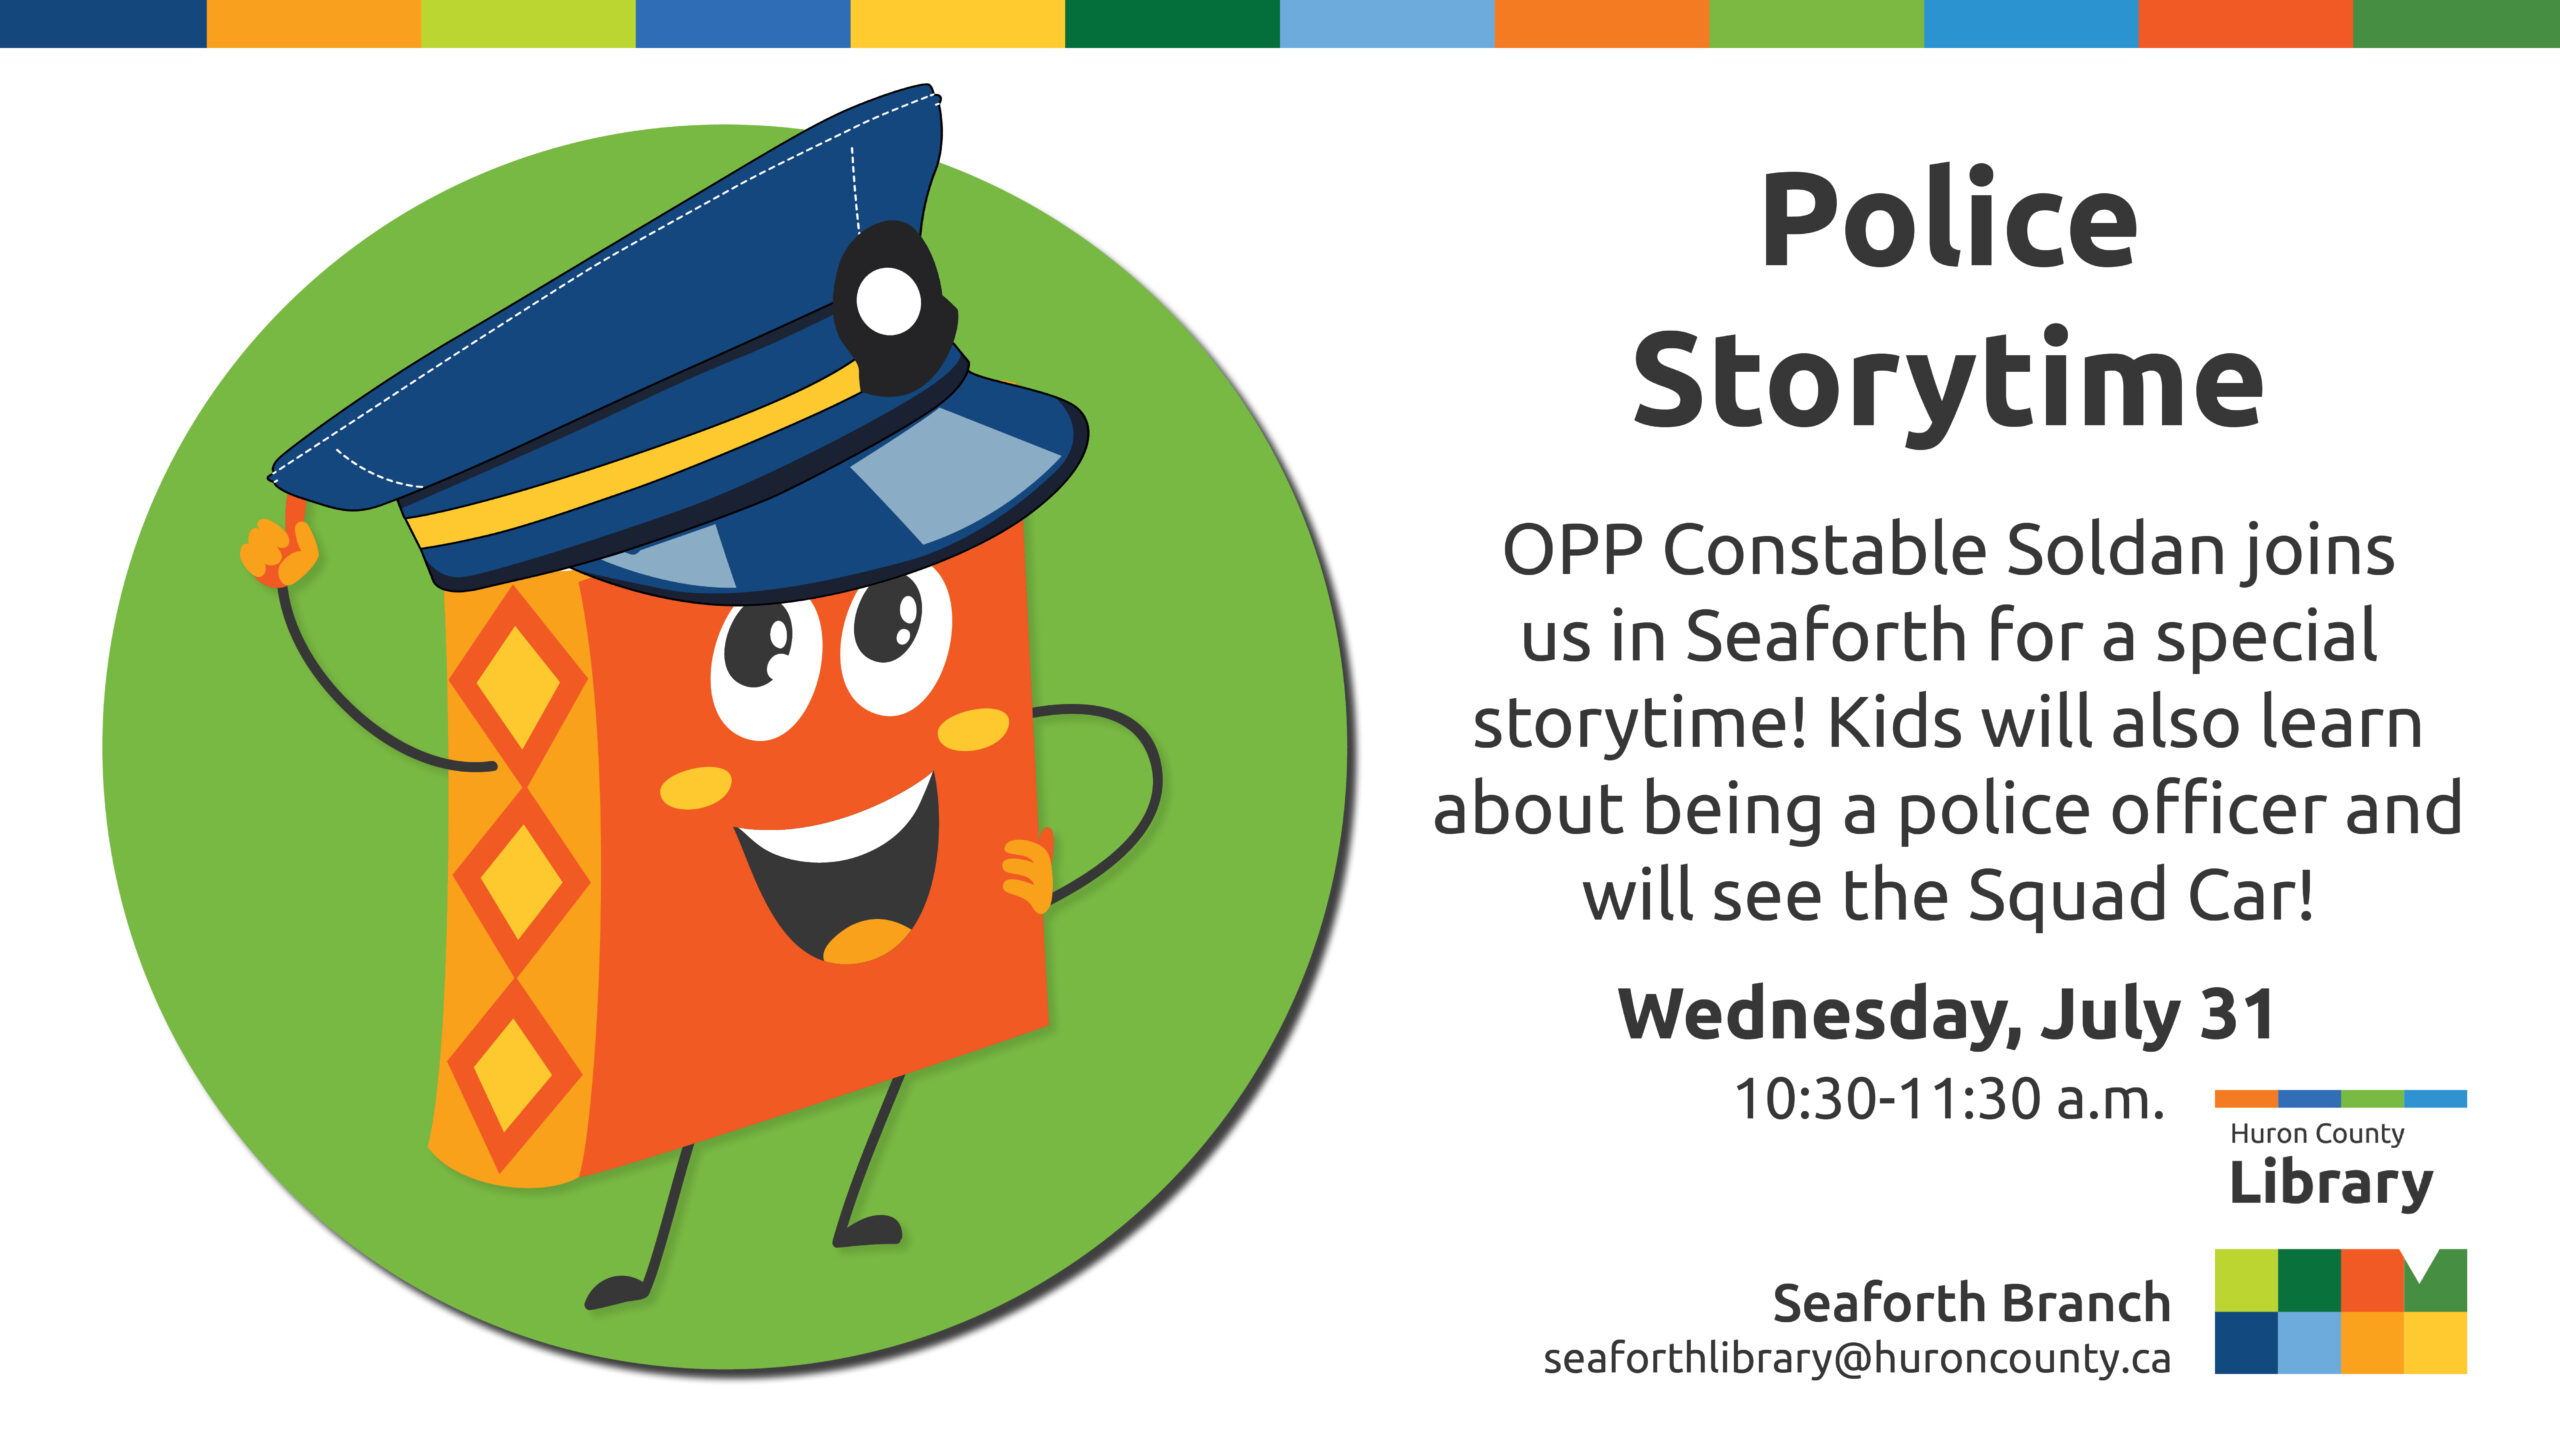 Illustration of Bob the Book wearing a police hat with text promoting police storytime